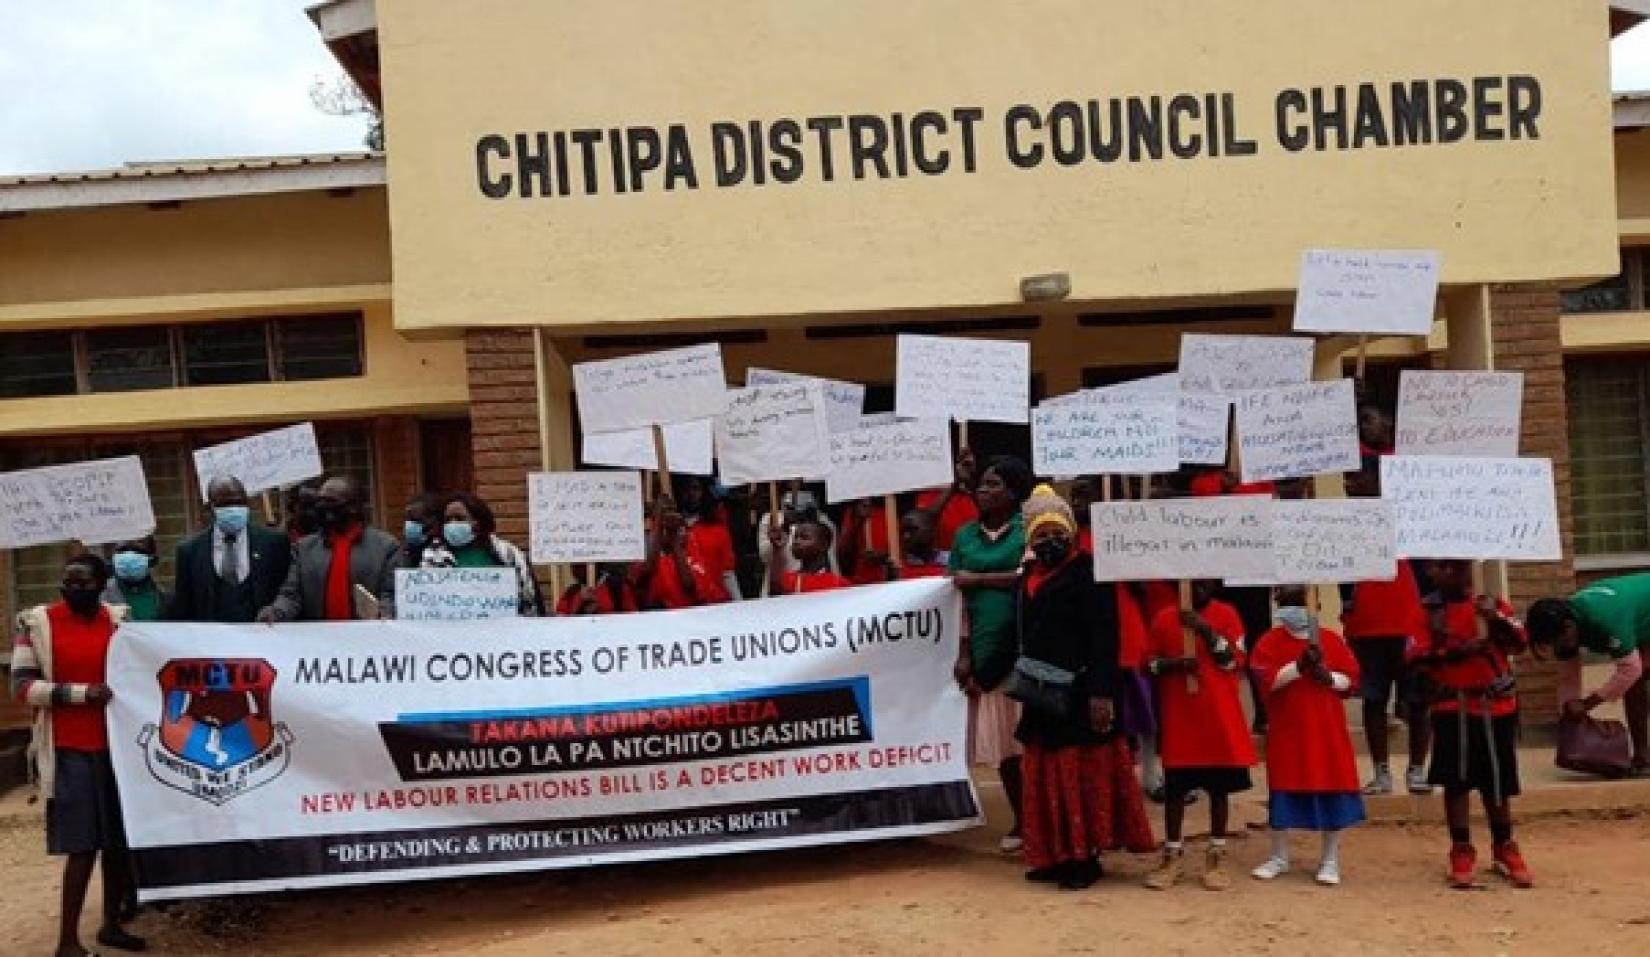 Malawi Congress of Trade Unions (MCTU) International Year for the Elimination of Child Labour and World Day Against Child Labour 2021 (IYECL) Open Day Event, Chitipa Community Centre, 26 July 2021.